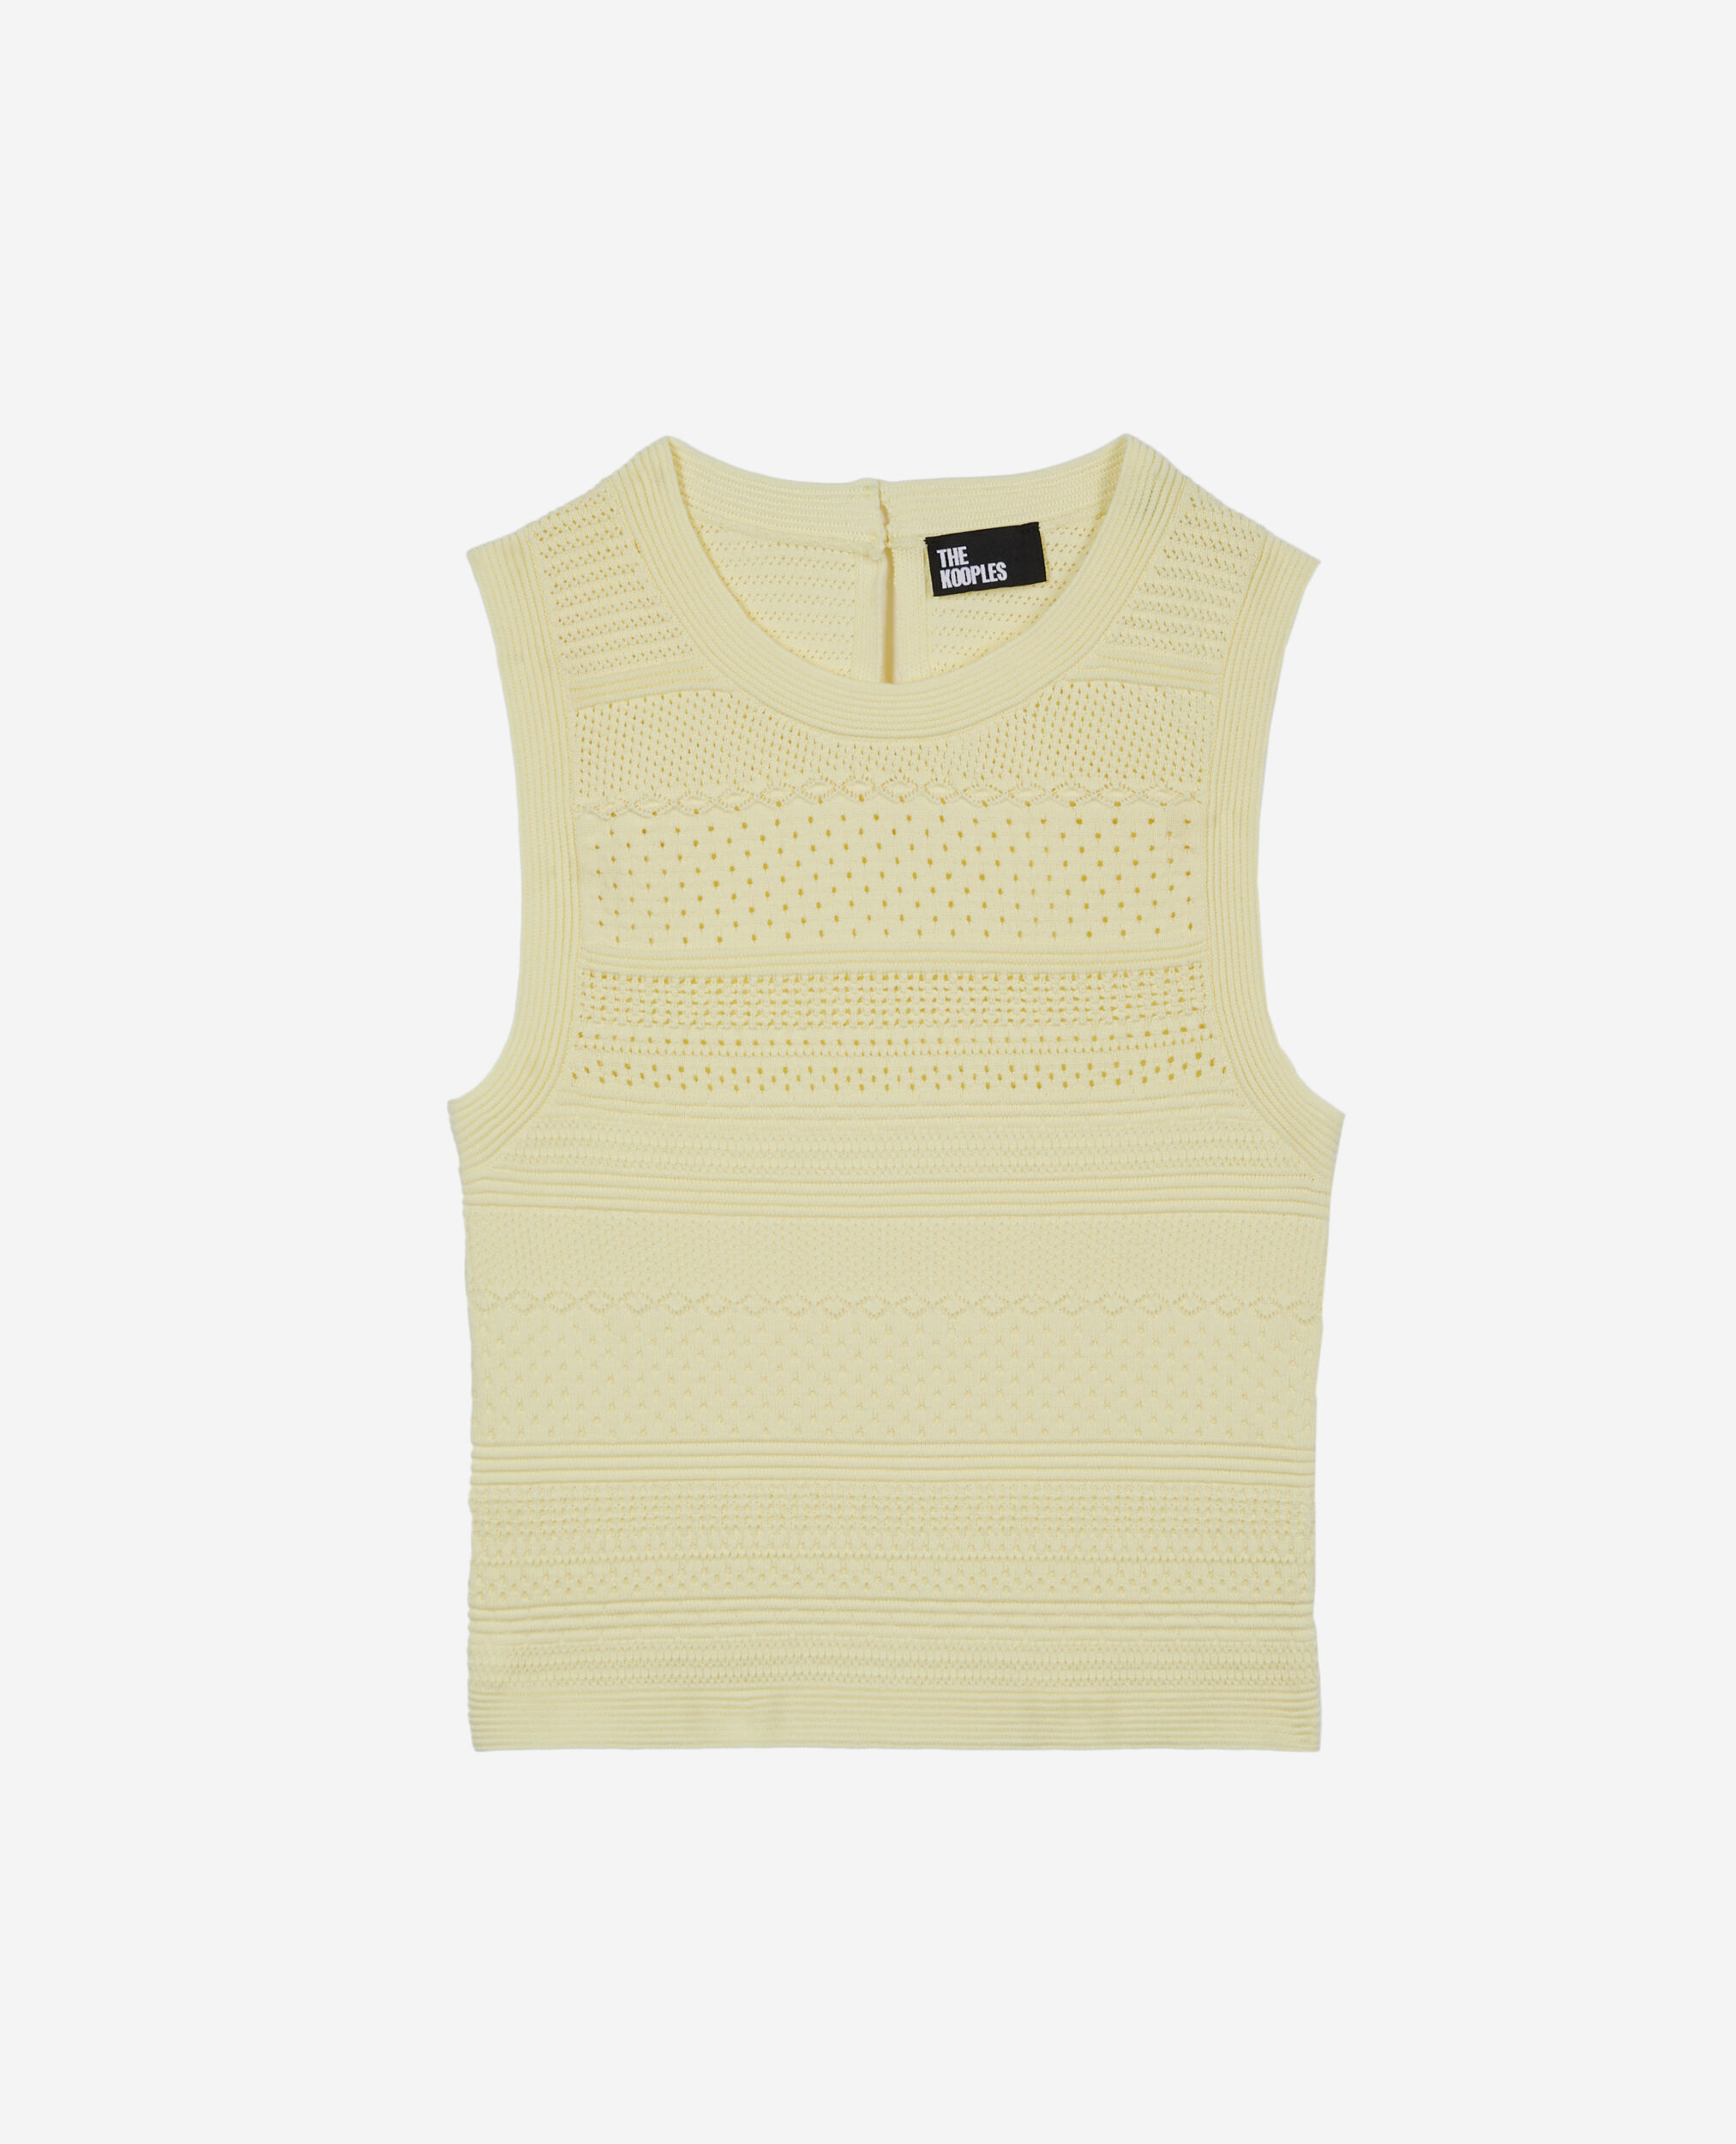 Short light yellow openwork knit top, BRIGHT YELLOW, hi-res image number null